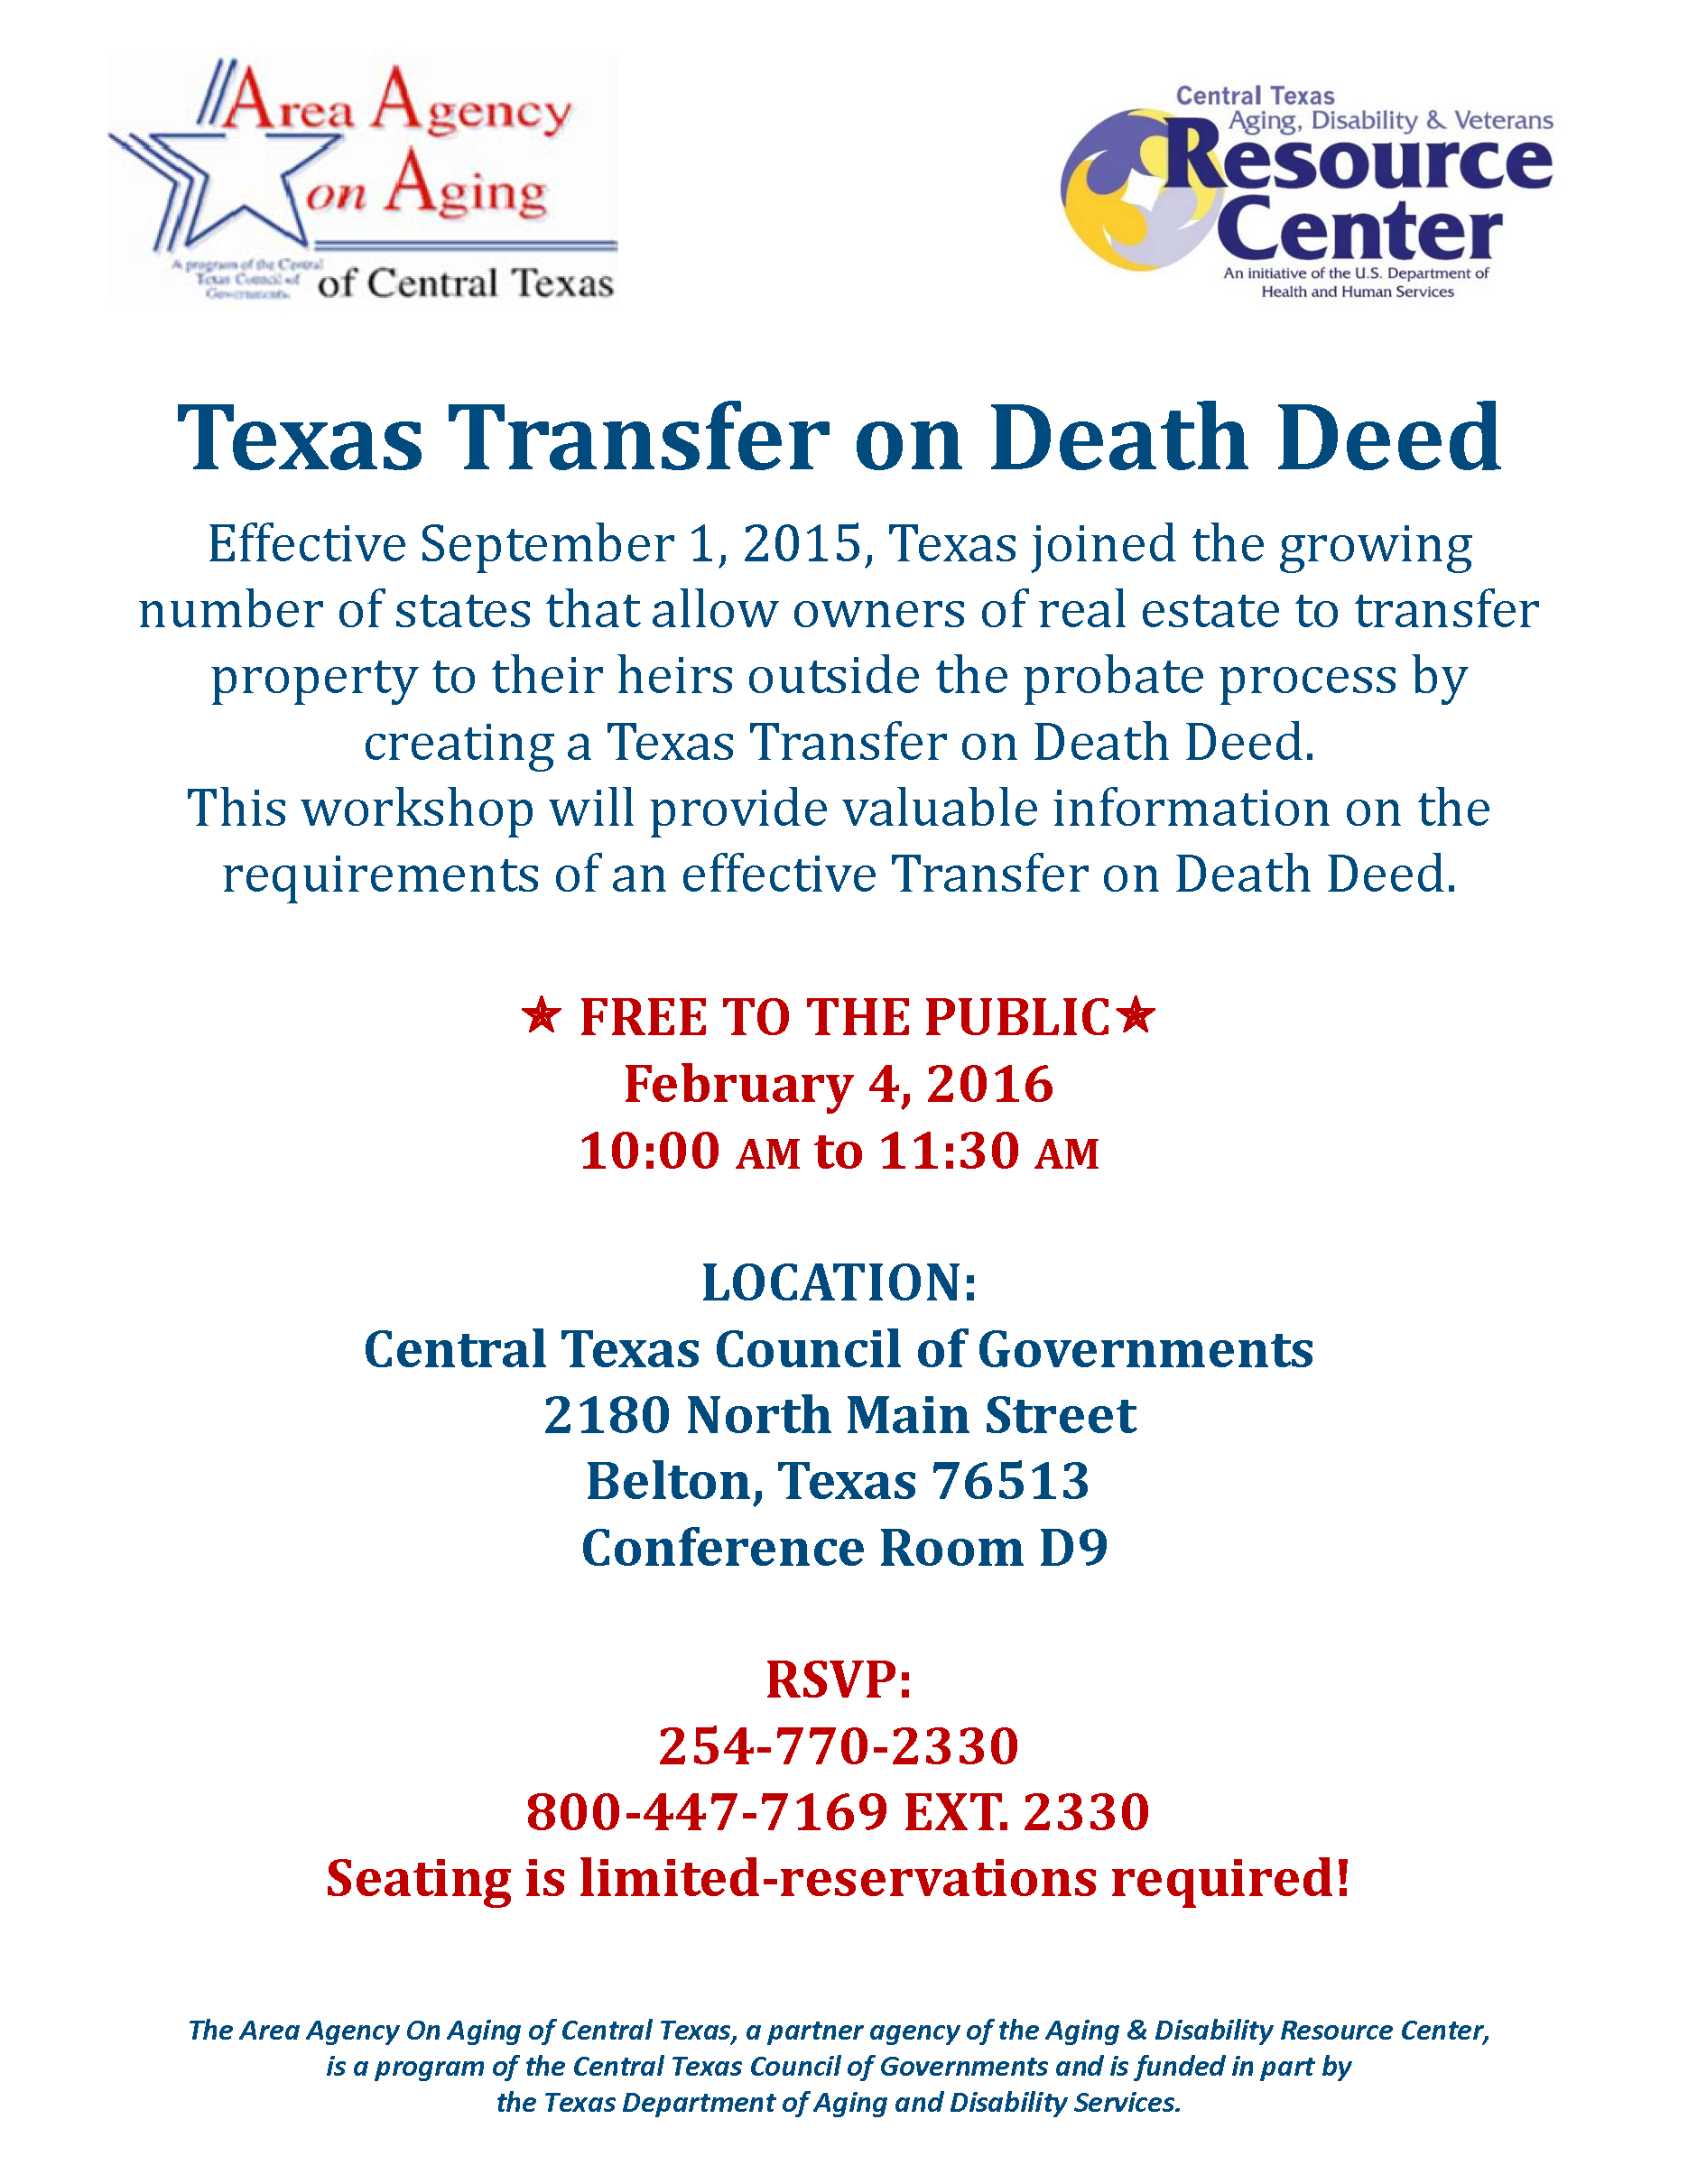 What Will Happen to Your Home When You Die? • Central Texas Council of